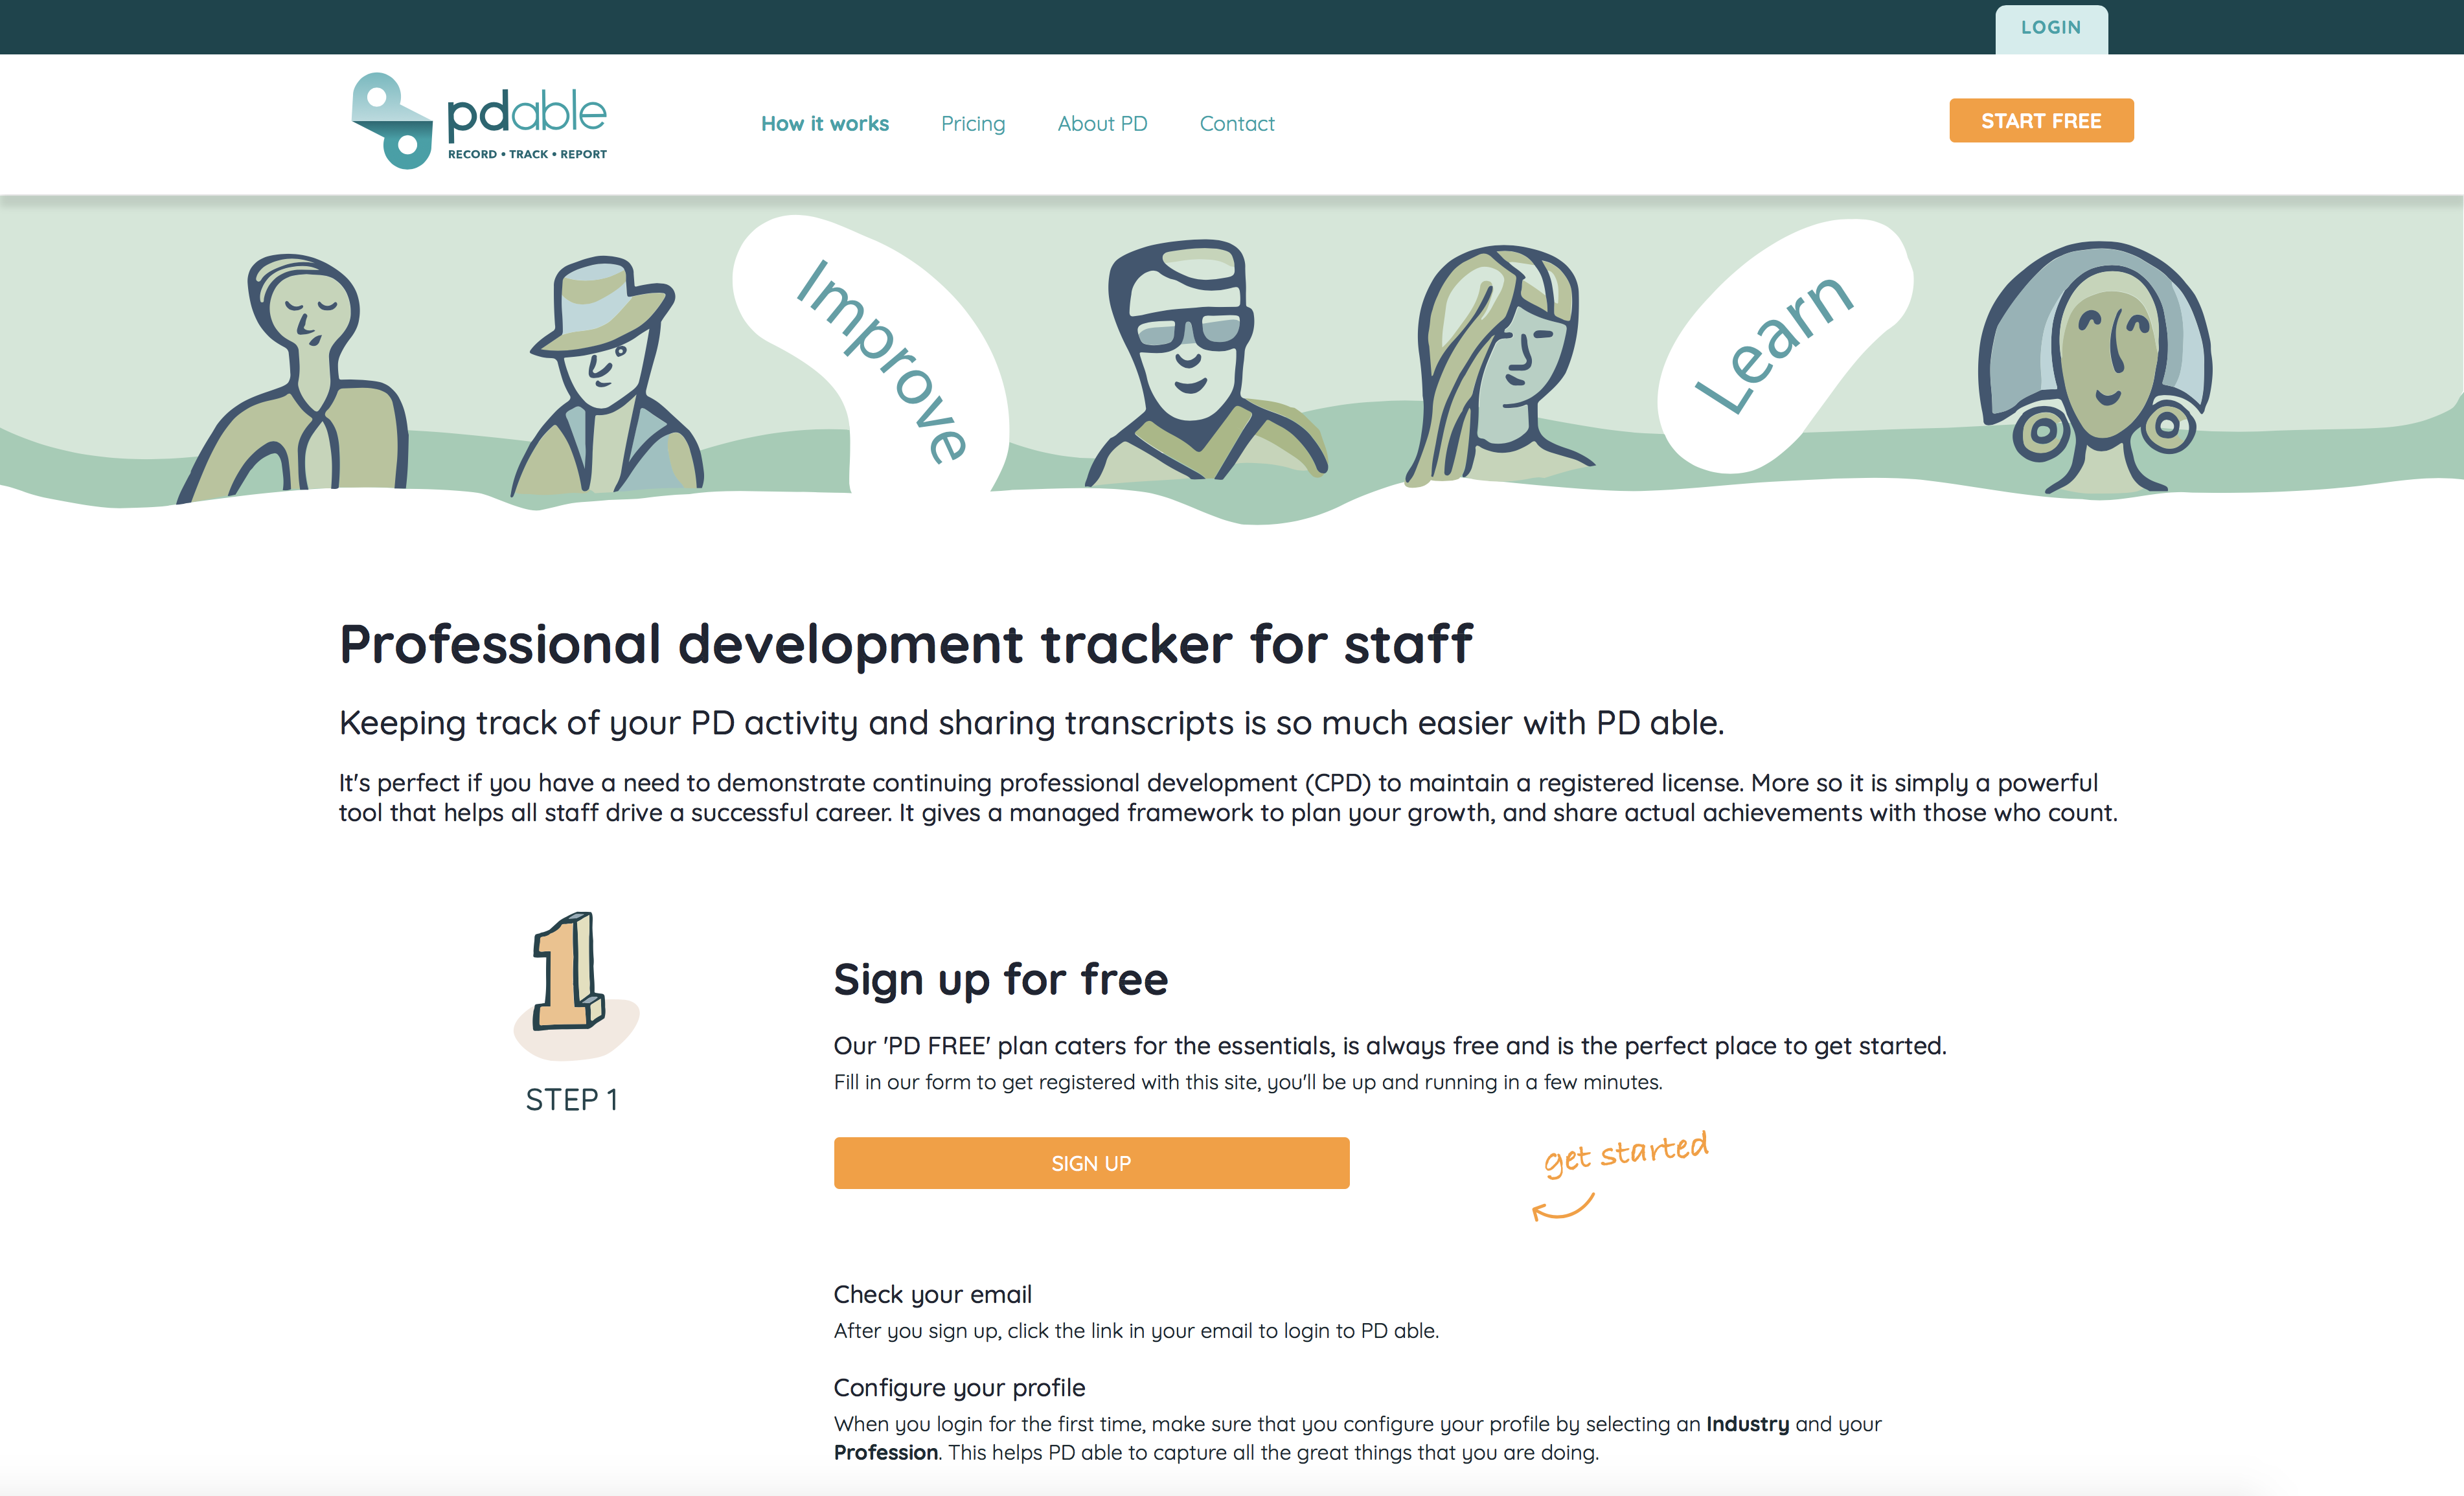 Sign up for free. Ideal for individuals or businesses wanting to track their continuing professional development journey.